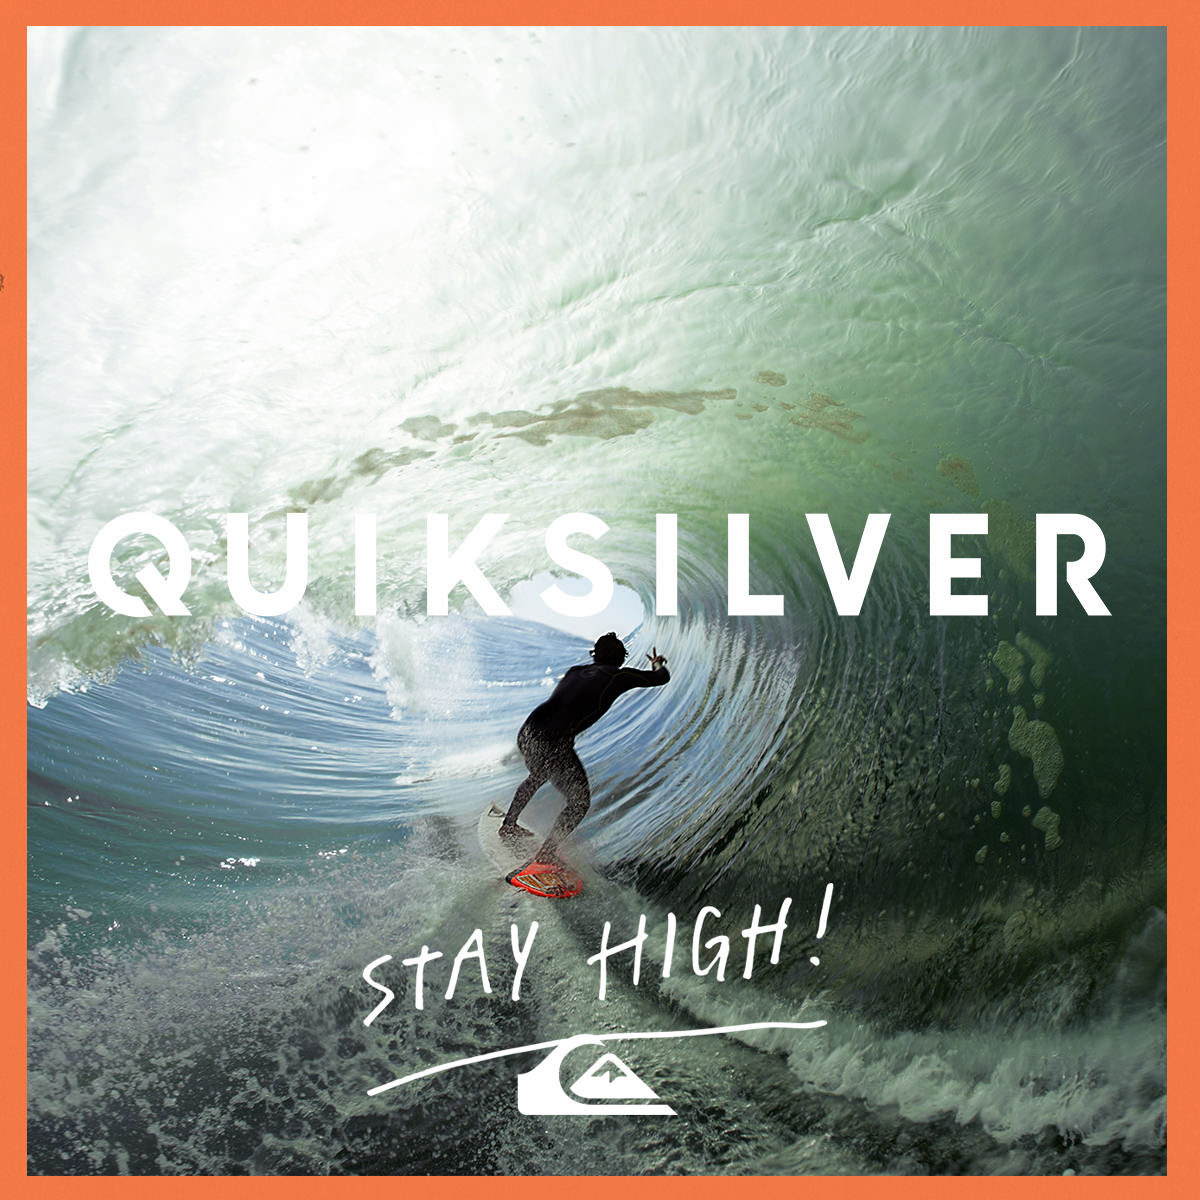 quiksilver-stay-high-1